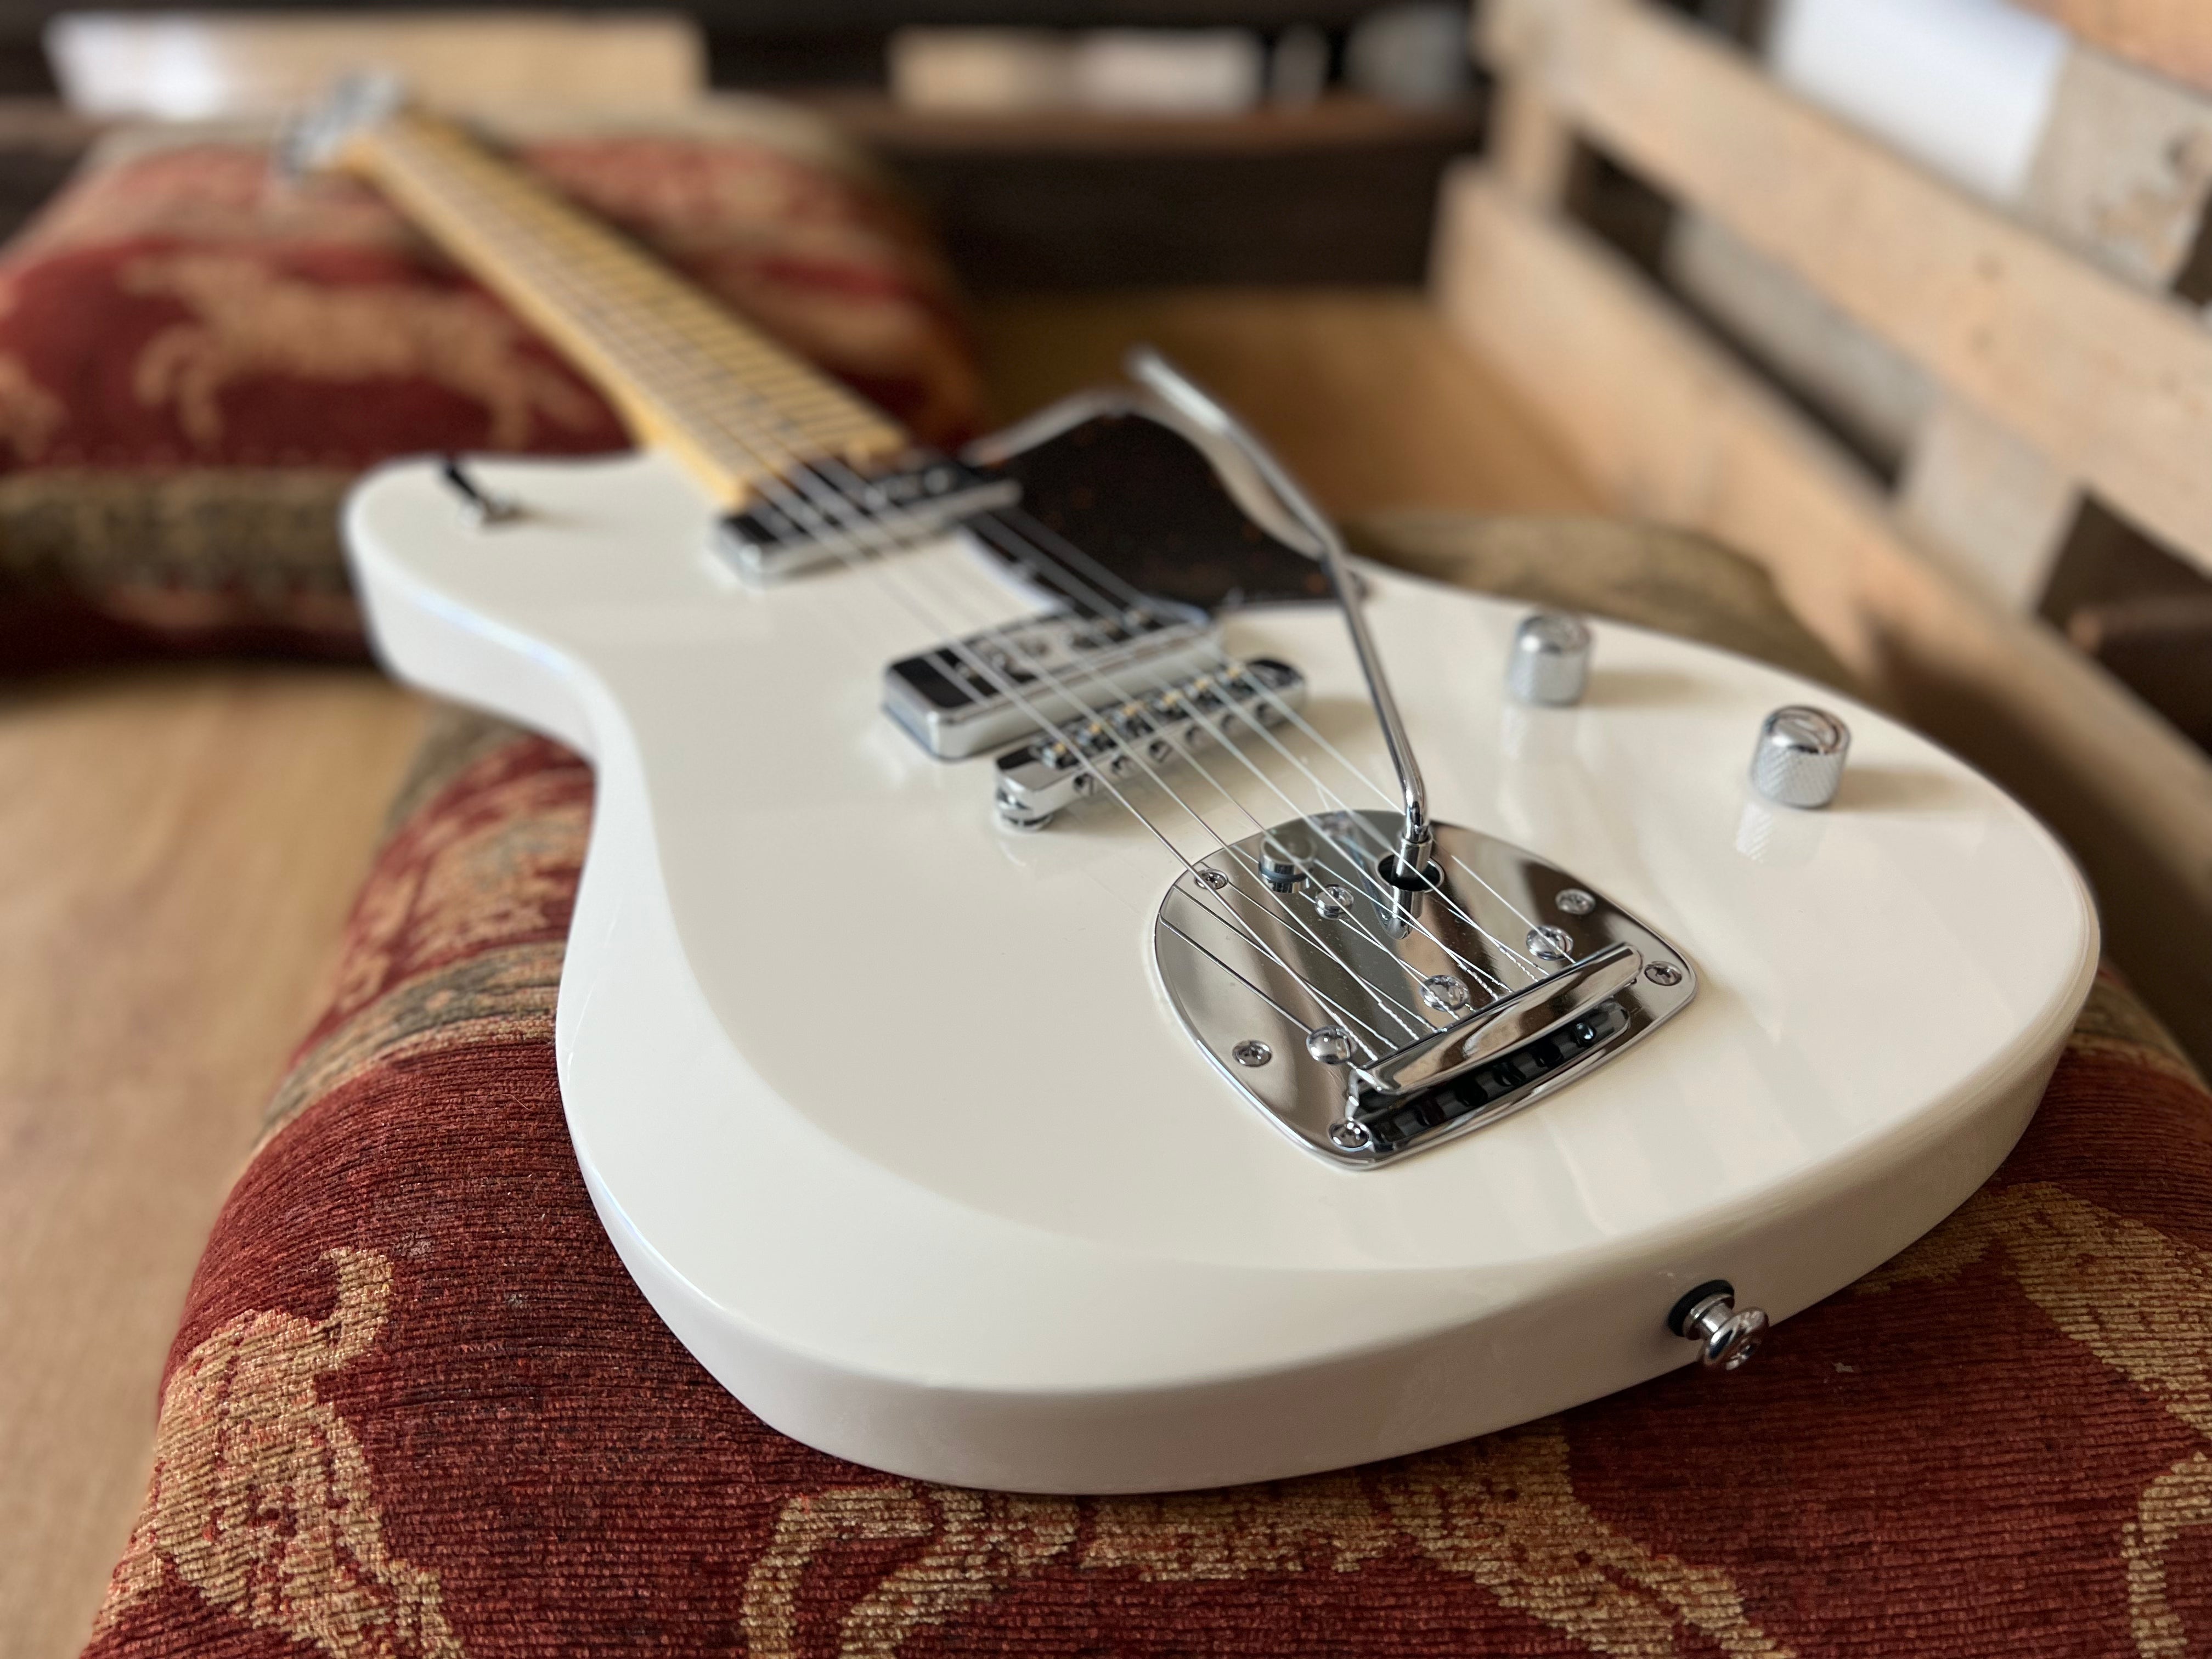 Gordon Smith The Gatsby Launch Edition 2021 Vintage White, Electric Guitar for sale at Richards Guitars.